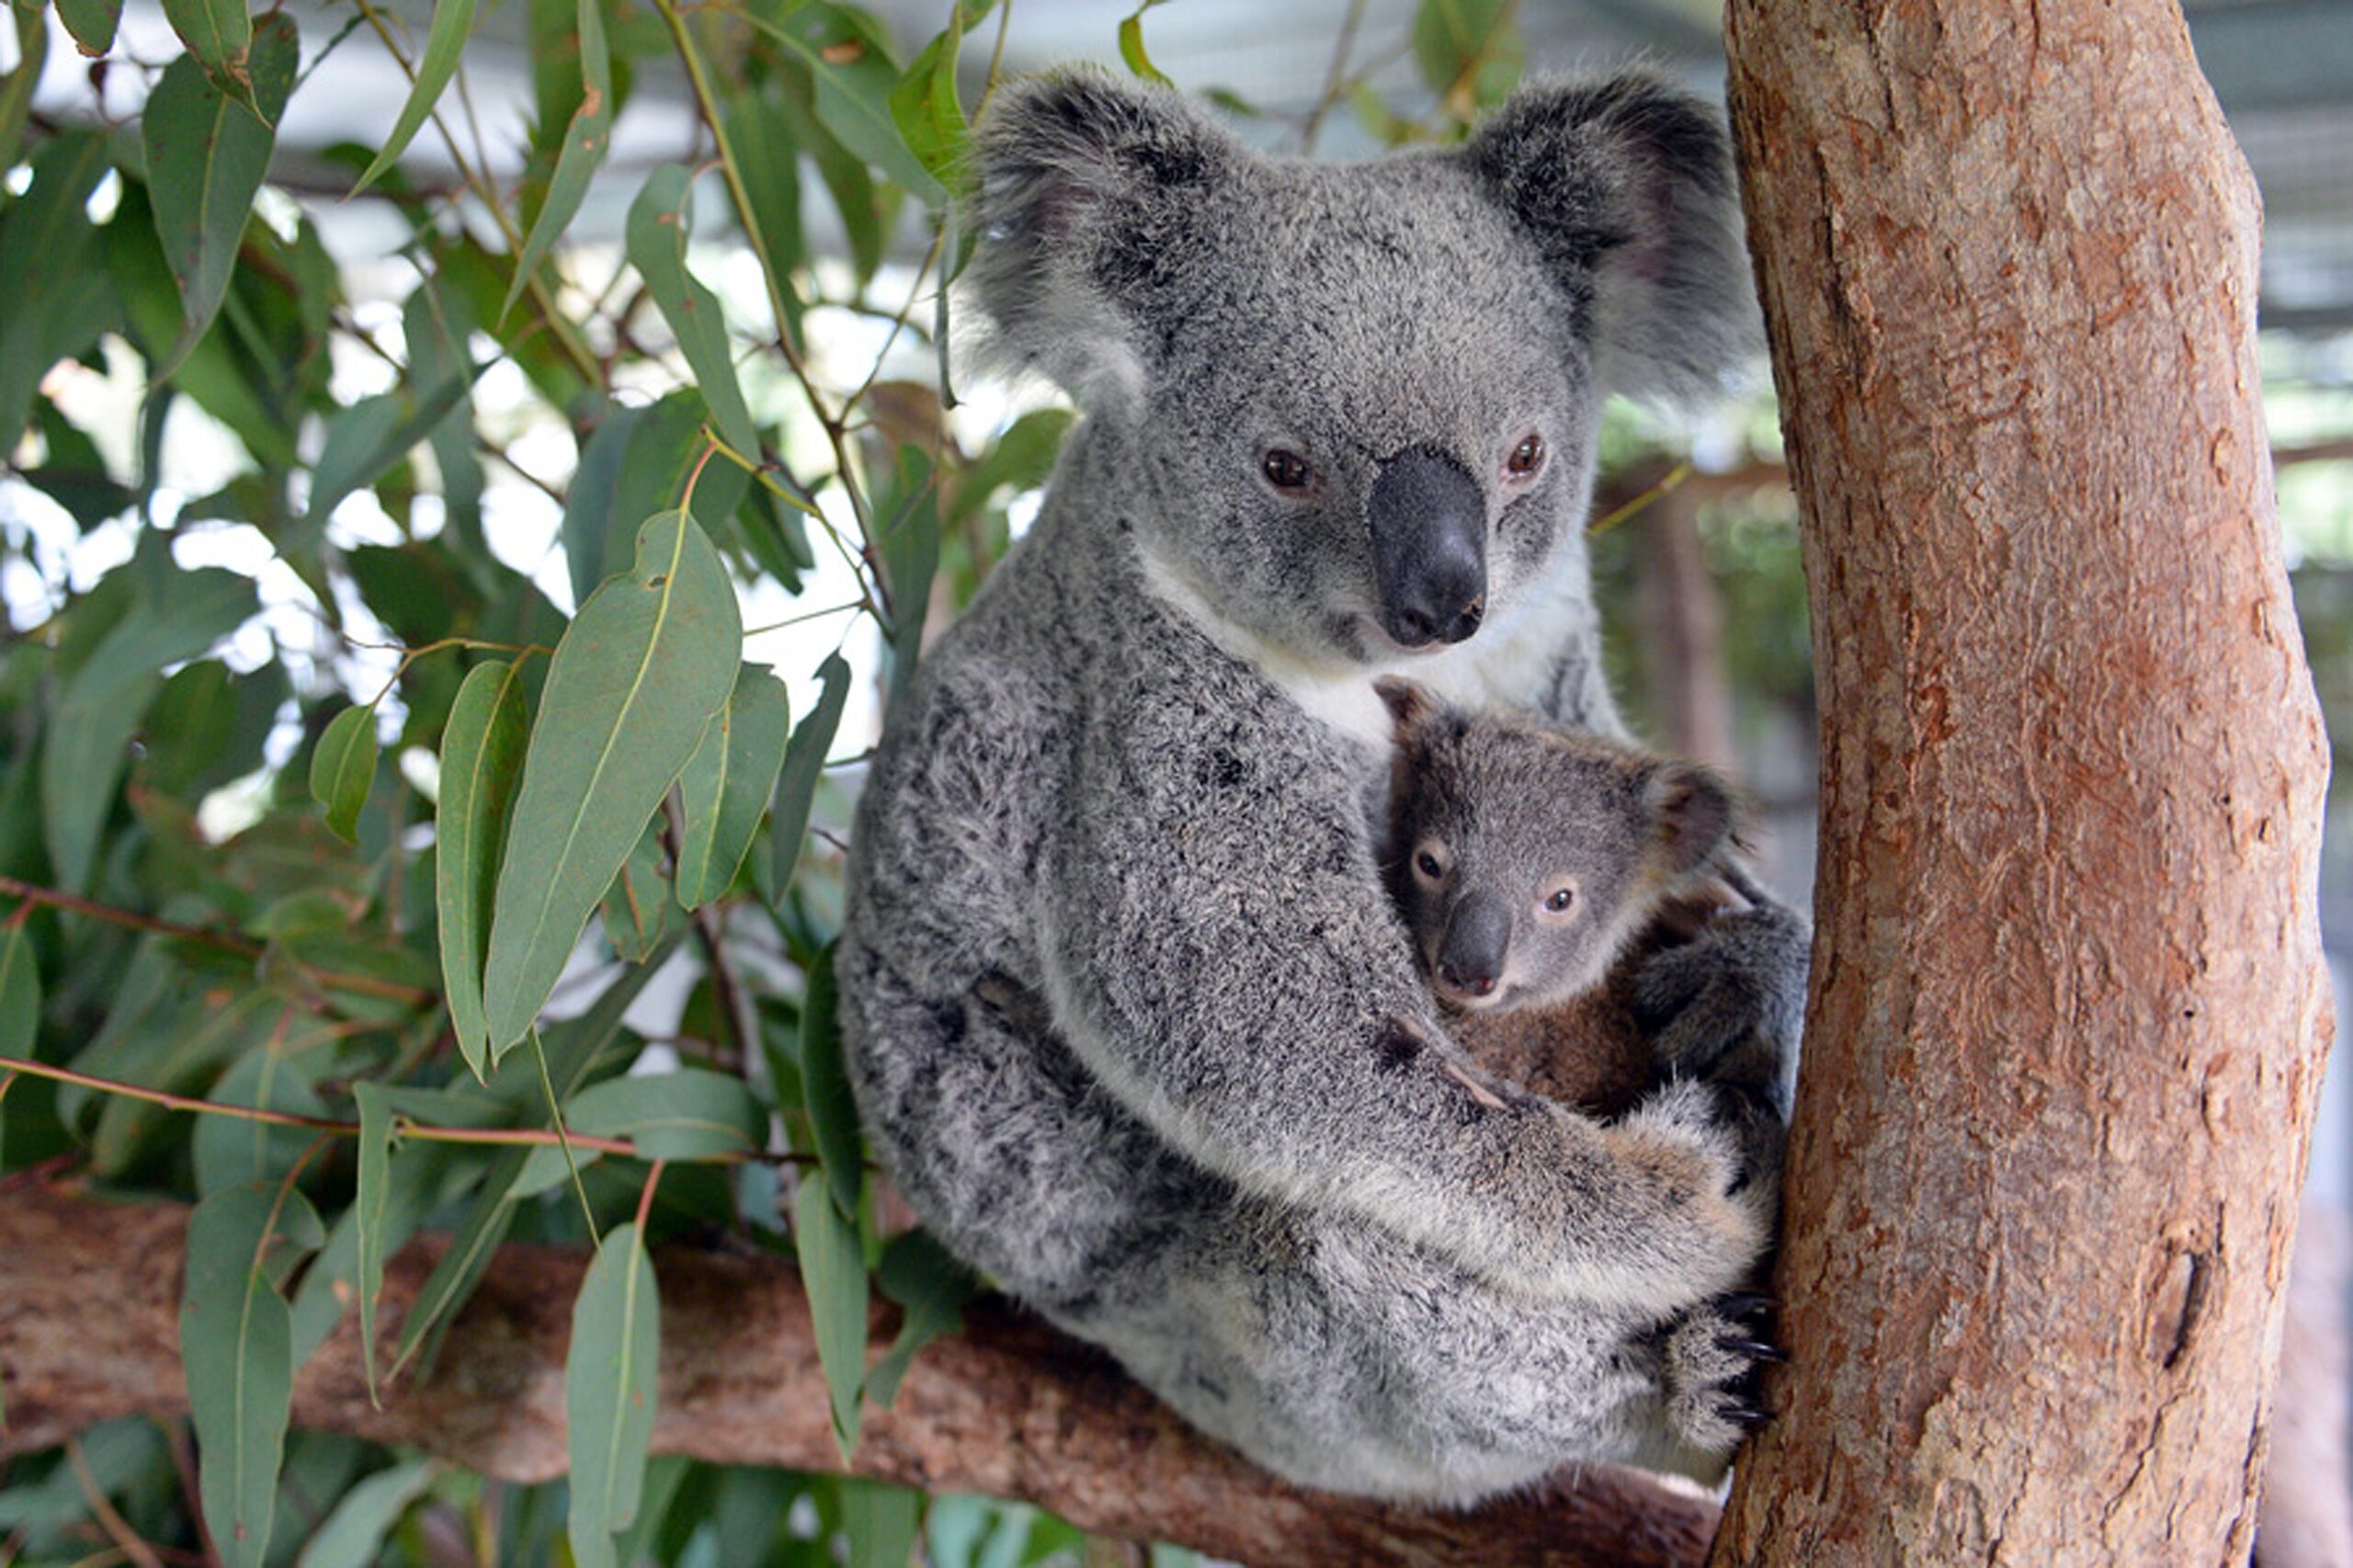 This undated handout picture taken recently by Ben Beaden and released to AFP by the Australia Zoo on June 16, 2015 shows Koala mum named “Lizzy” cuddling her baby “Phantom” at the Australia Zoo Wildlife Hospital at Beerwah in Queensland state. Lizzy is recovering well after her surgery last week while Phantom is putting on weight as well which is a great sign for the health of both mother and baby. Lizzy and Phantom were brought into the Australia Zoo Wildlife Hospital after Lizzy was hit by a car on the Warrego Highway near Coominya, west of Brisbane. (Photo by Ben Beaden/AFP Photo)